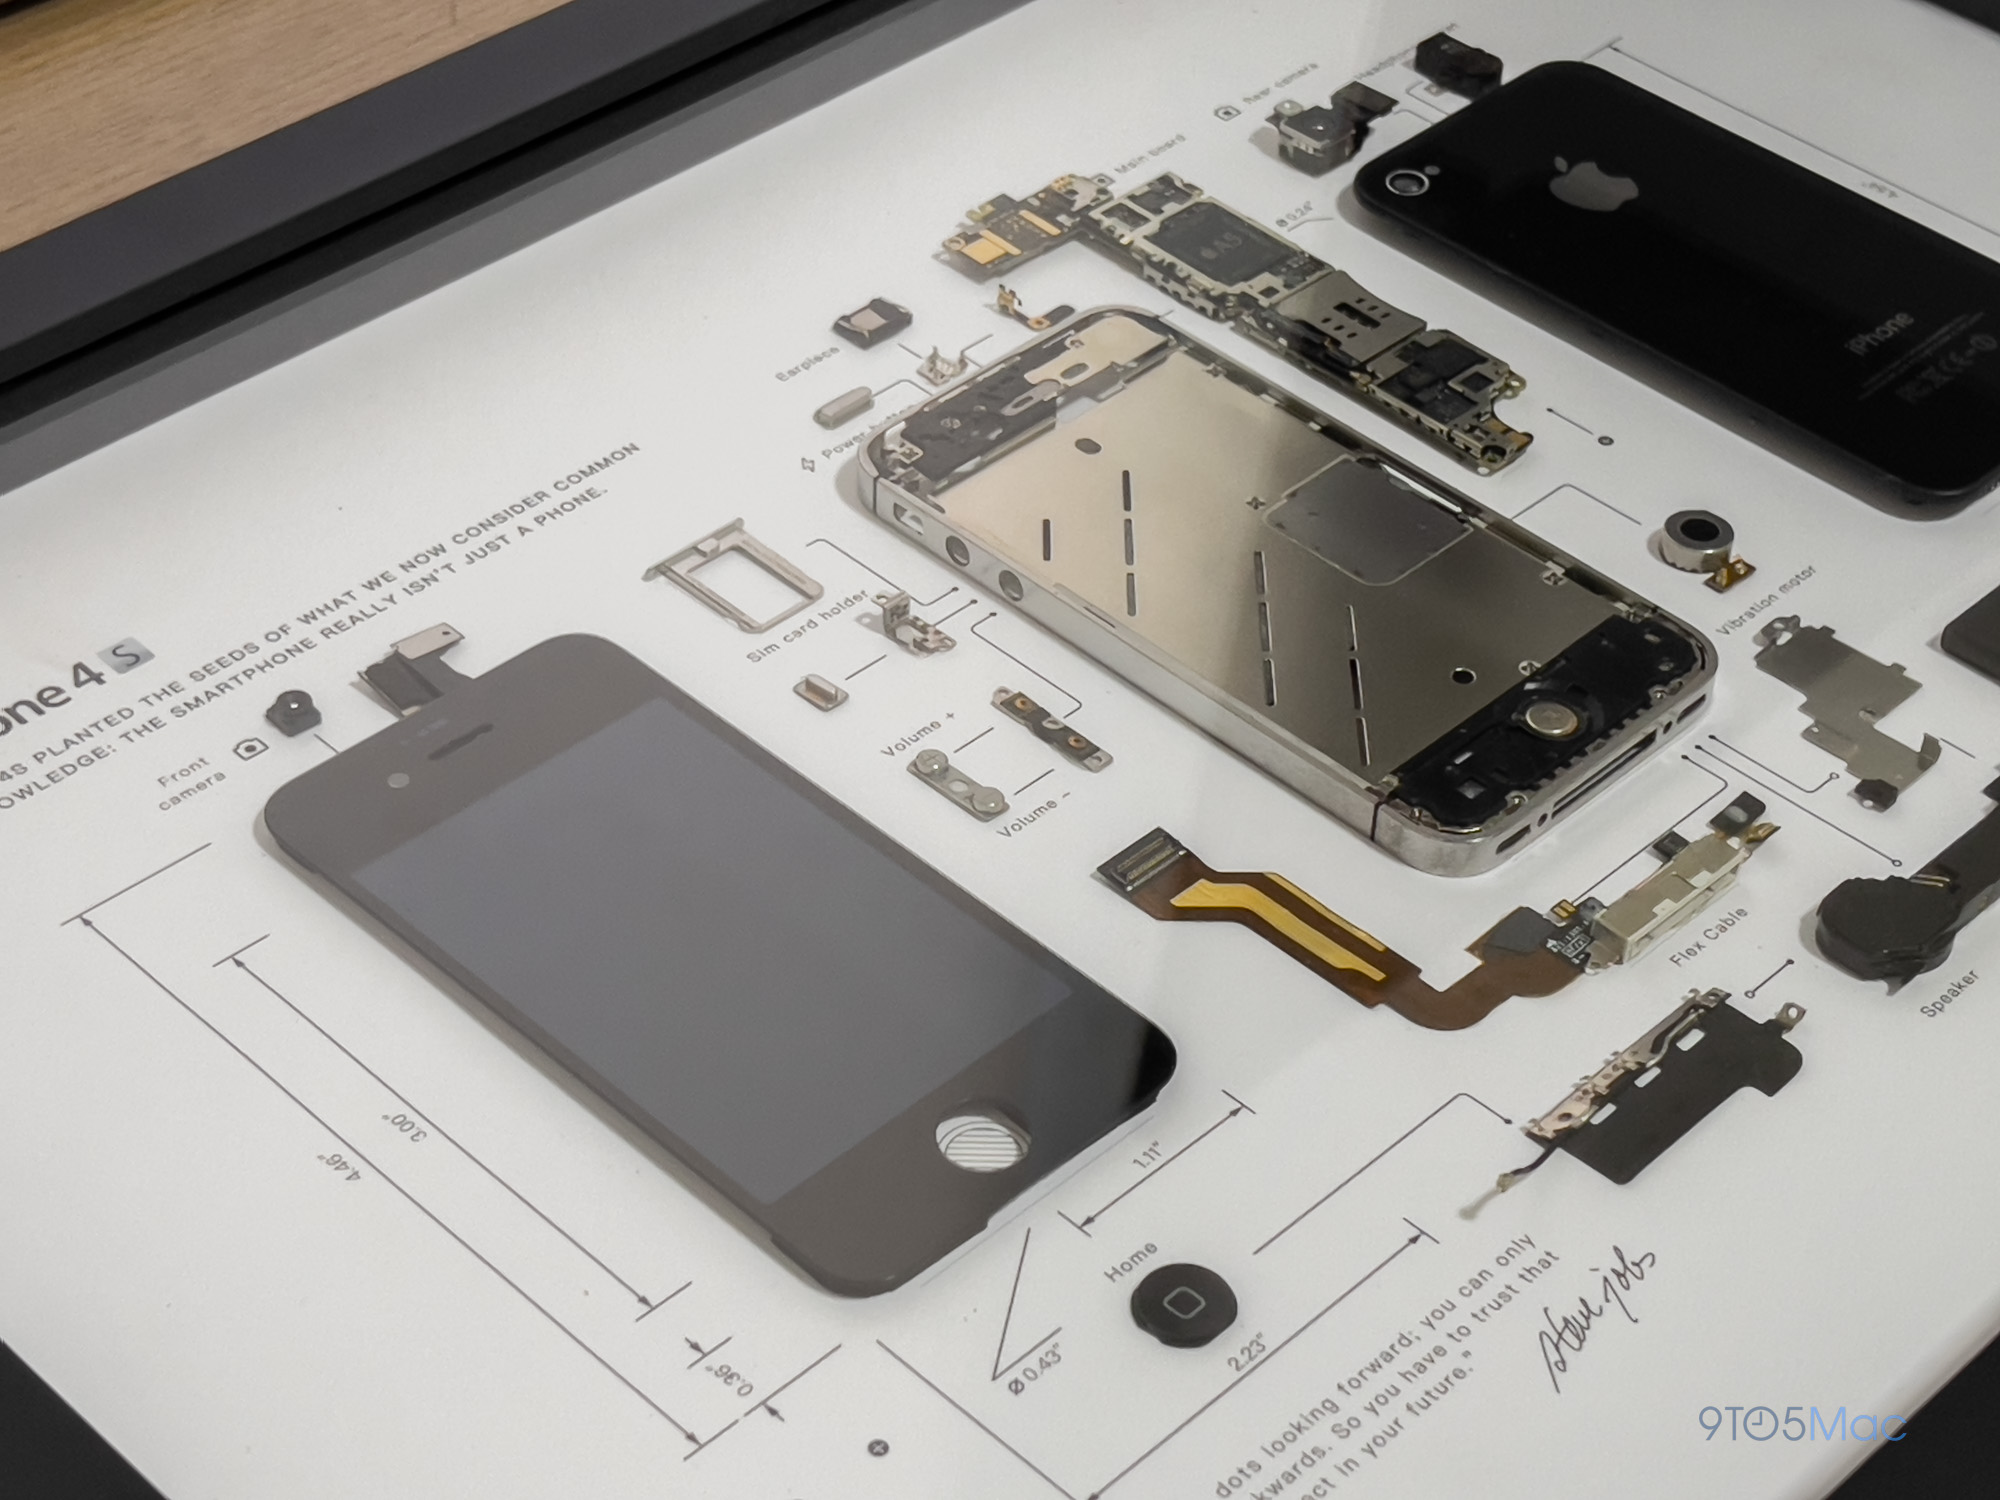 Hands-on: GRID 4S turns a disassembled iPhone into decor for your 